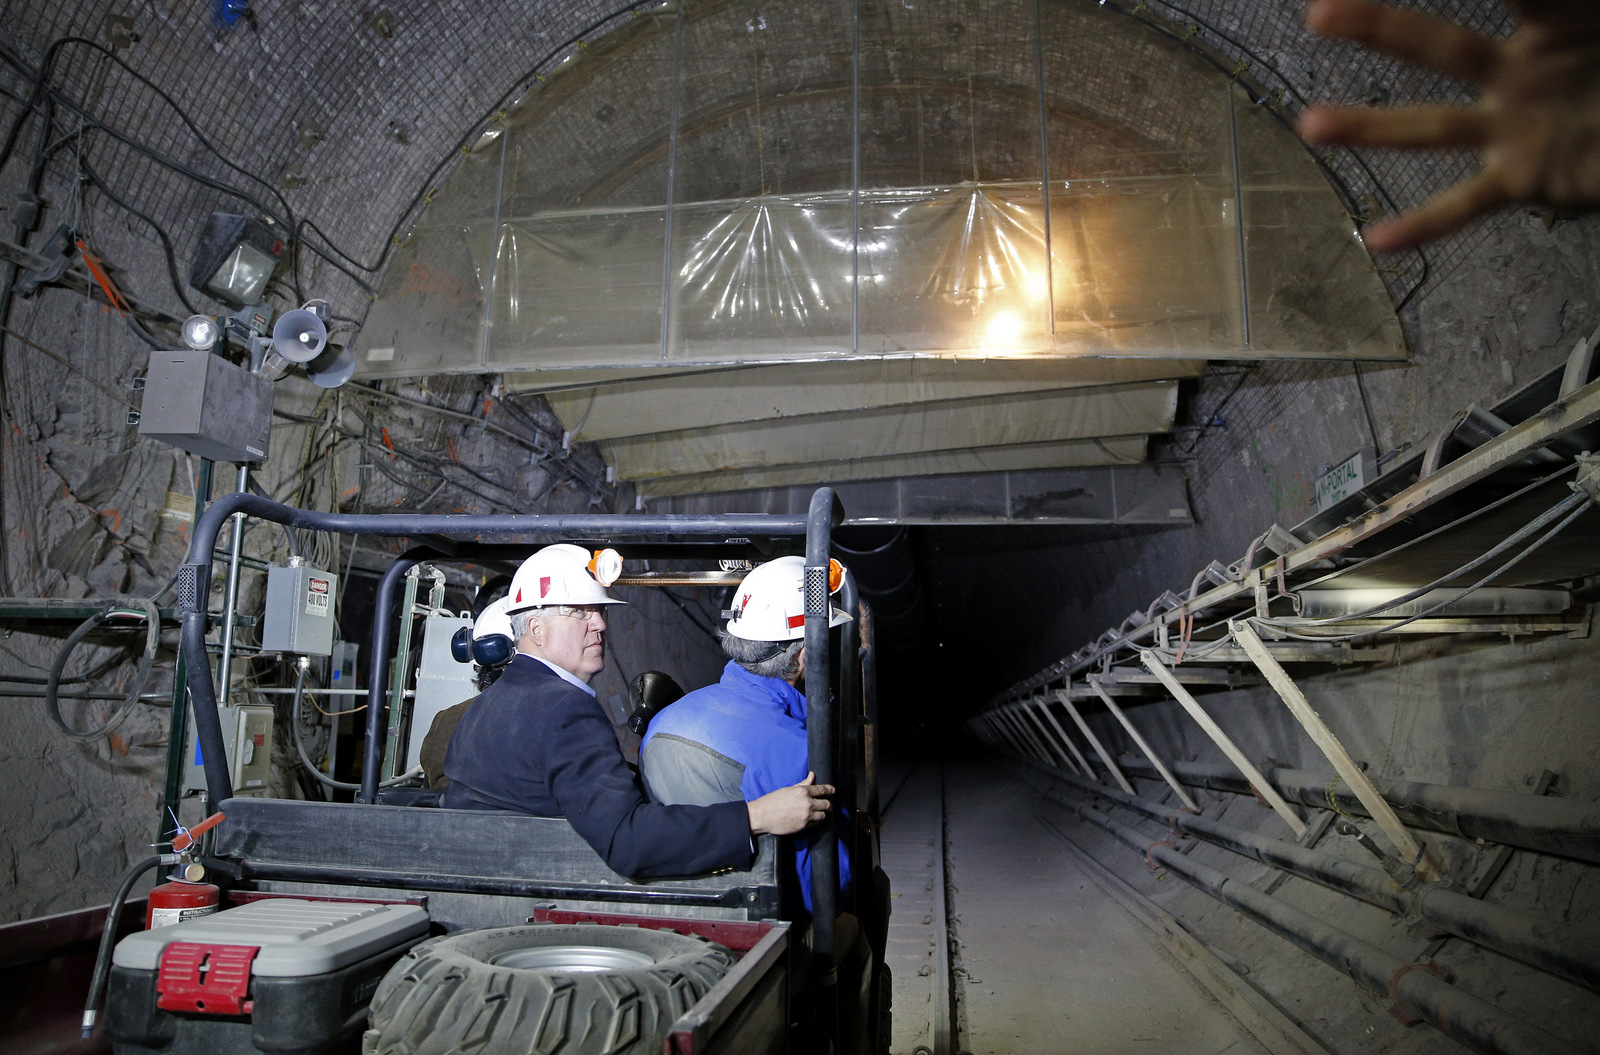 Rep. John Shimkus, R-Ill., left, looks around inside of Yucca Mountain during a congressional tour Thursday, April 9, 2015, near Mercury, Nev. Several members of congress toured the proposed radioactive wast dump 90 miles northwest of Las Vegas. (AP Photo/John Locher)